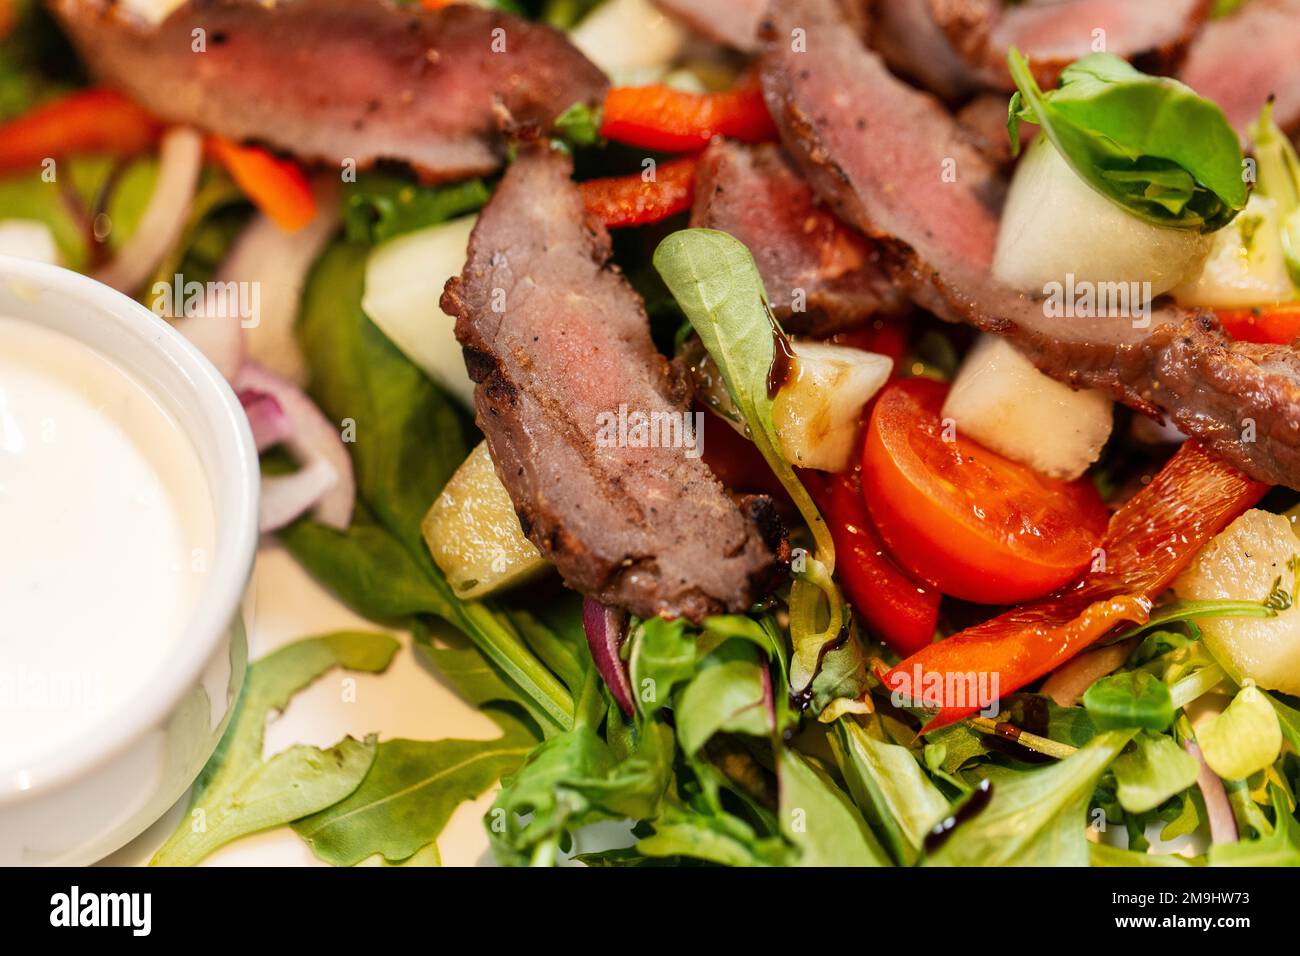 close up of meat with vegetable salad on plate Stock Photo